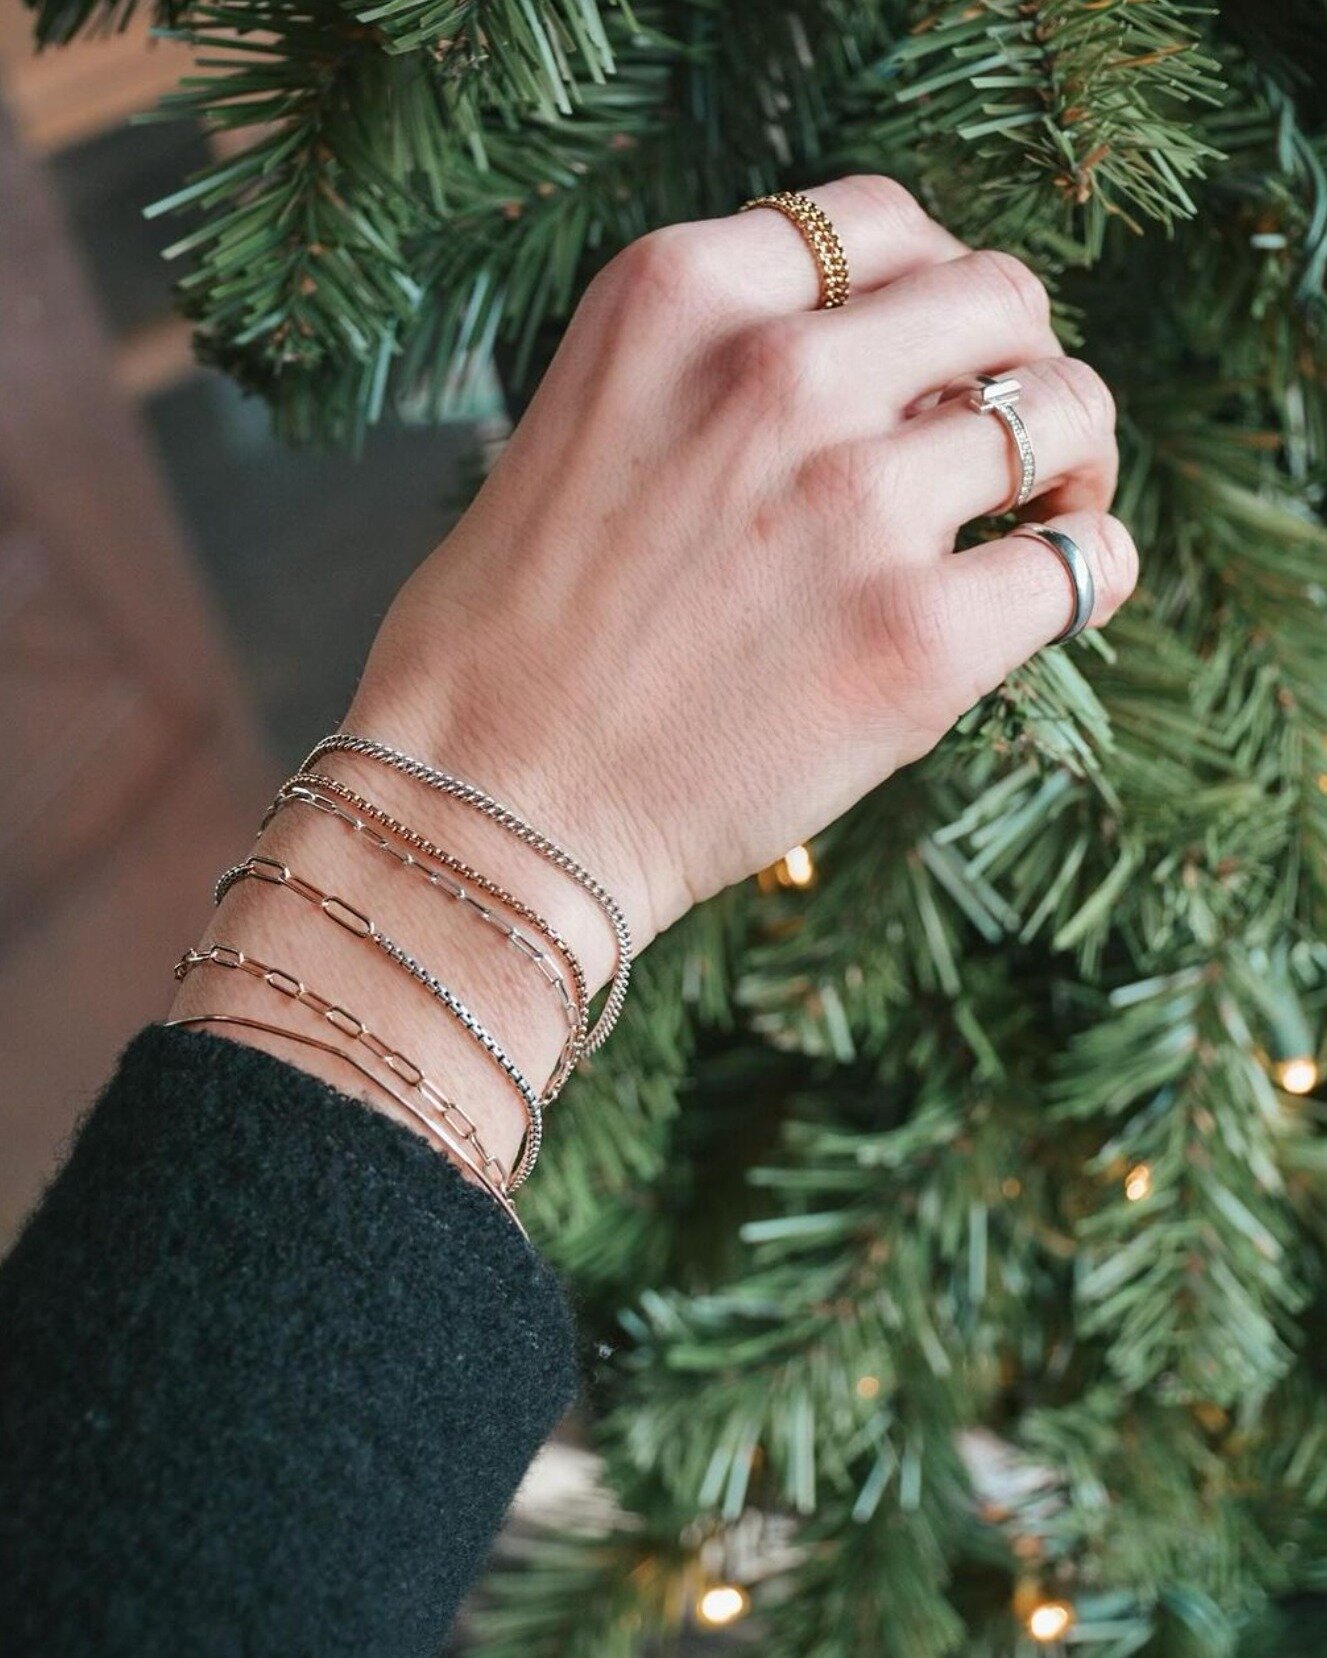 Get a gift that lasts forever with @bonded.lasvegas s permanent jewelry 🤩

Mindy Hamilton, owner of @bonded.lasvegas s is a member of the Las Vegas Fashion Council.